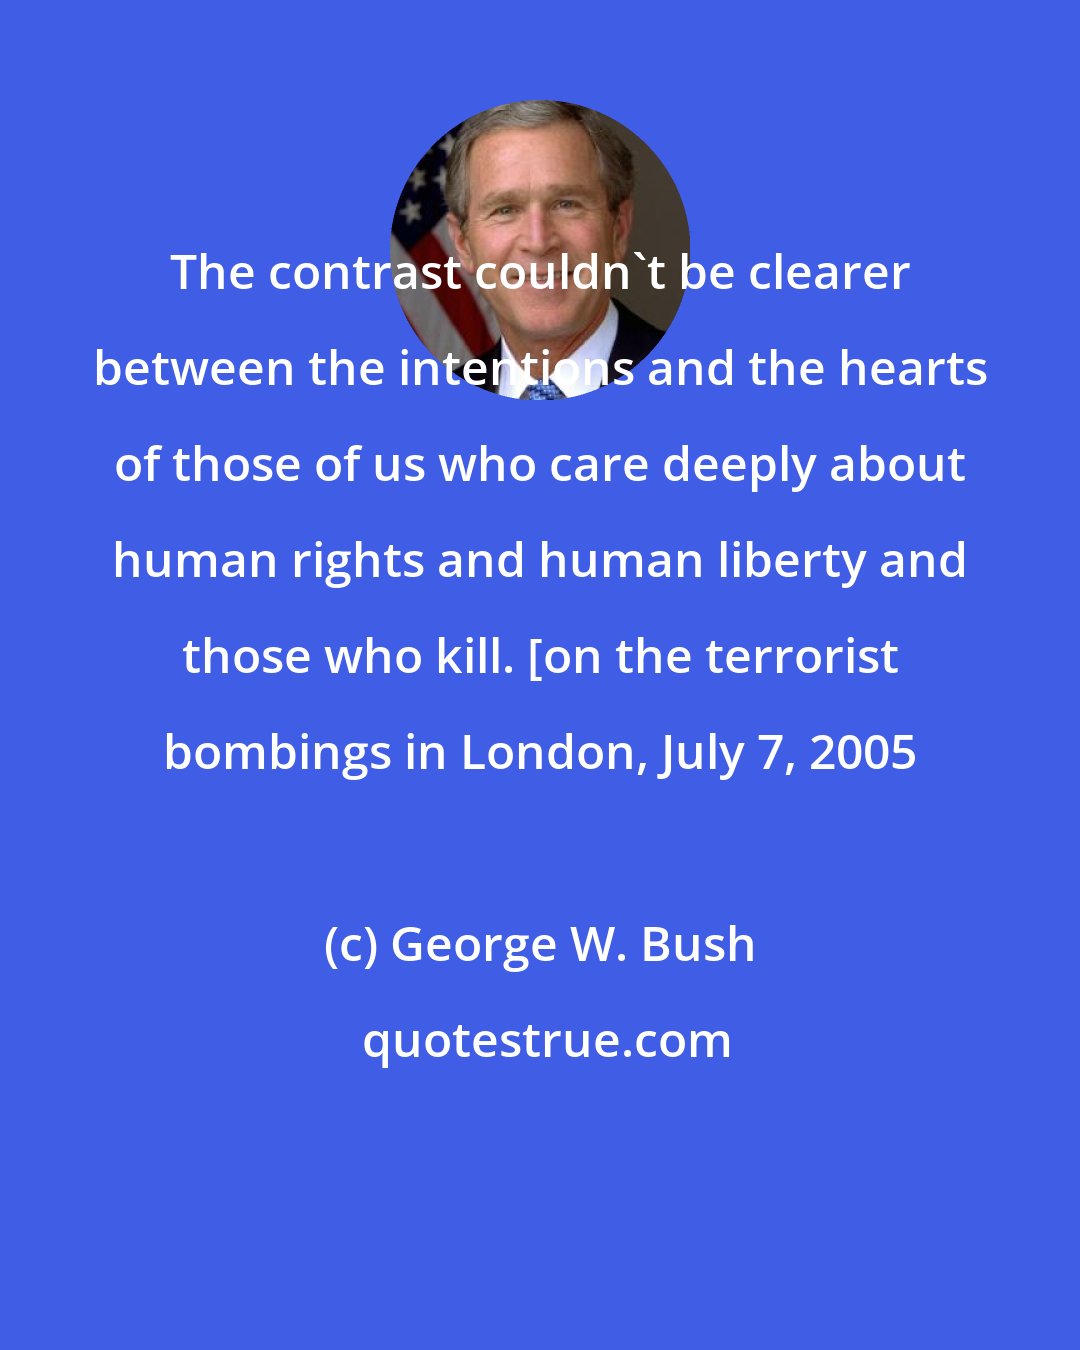 George W. Bush: The contrast couldn't be clearer between the intentions and the hearts of those of us who care deeply about human rights and human liberty and those who kill. [on the terrorist bombings in London, July 7, 2005